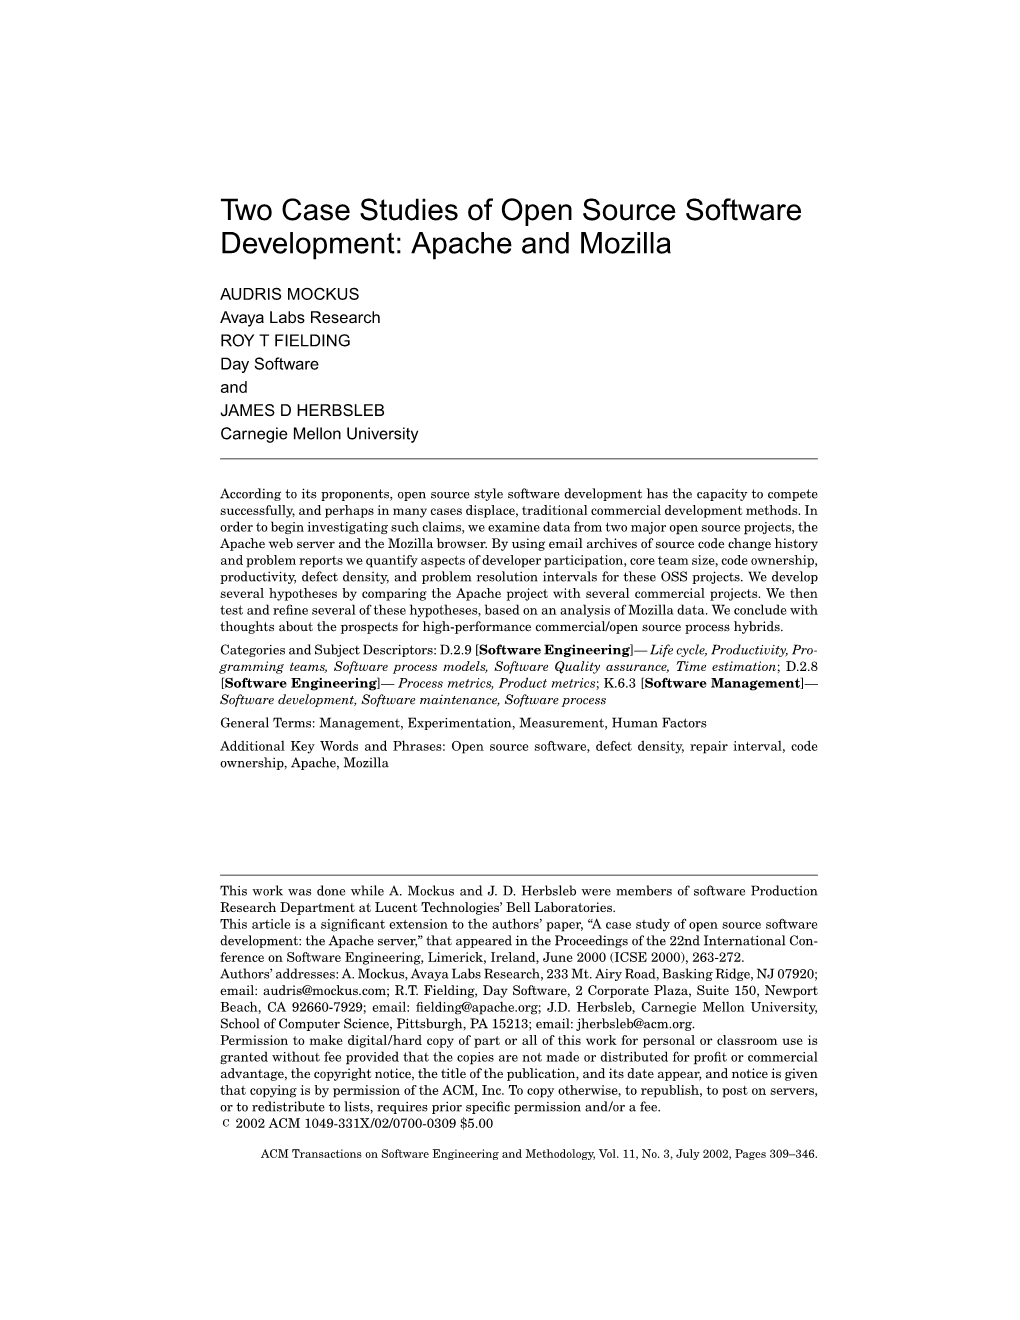 Two Case Studies of Open Source Software Development: Apache and Mozilla